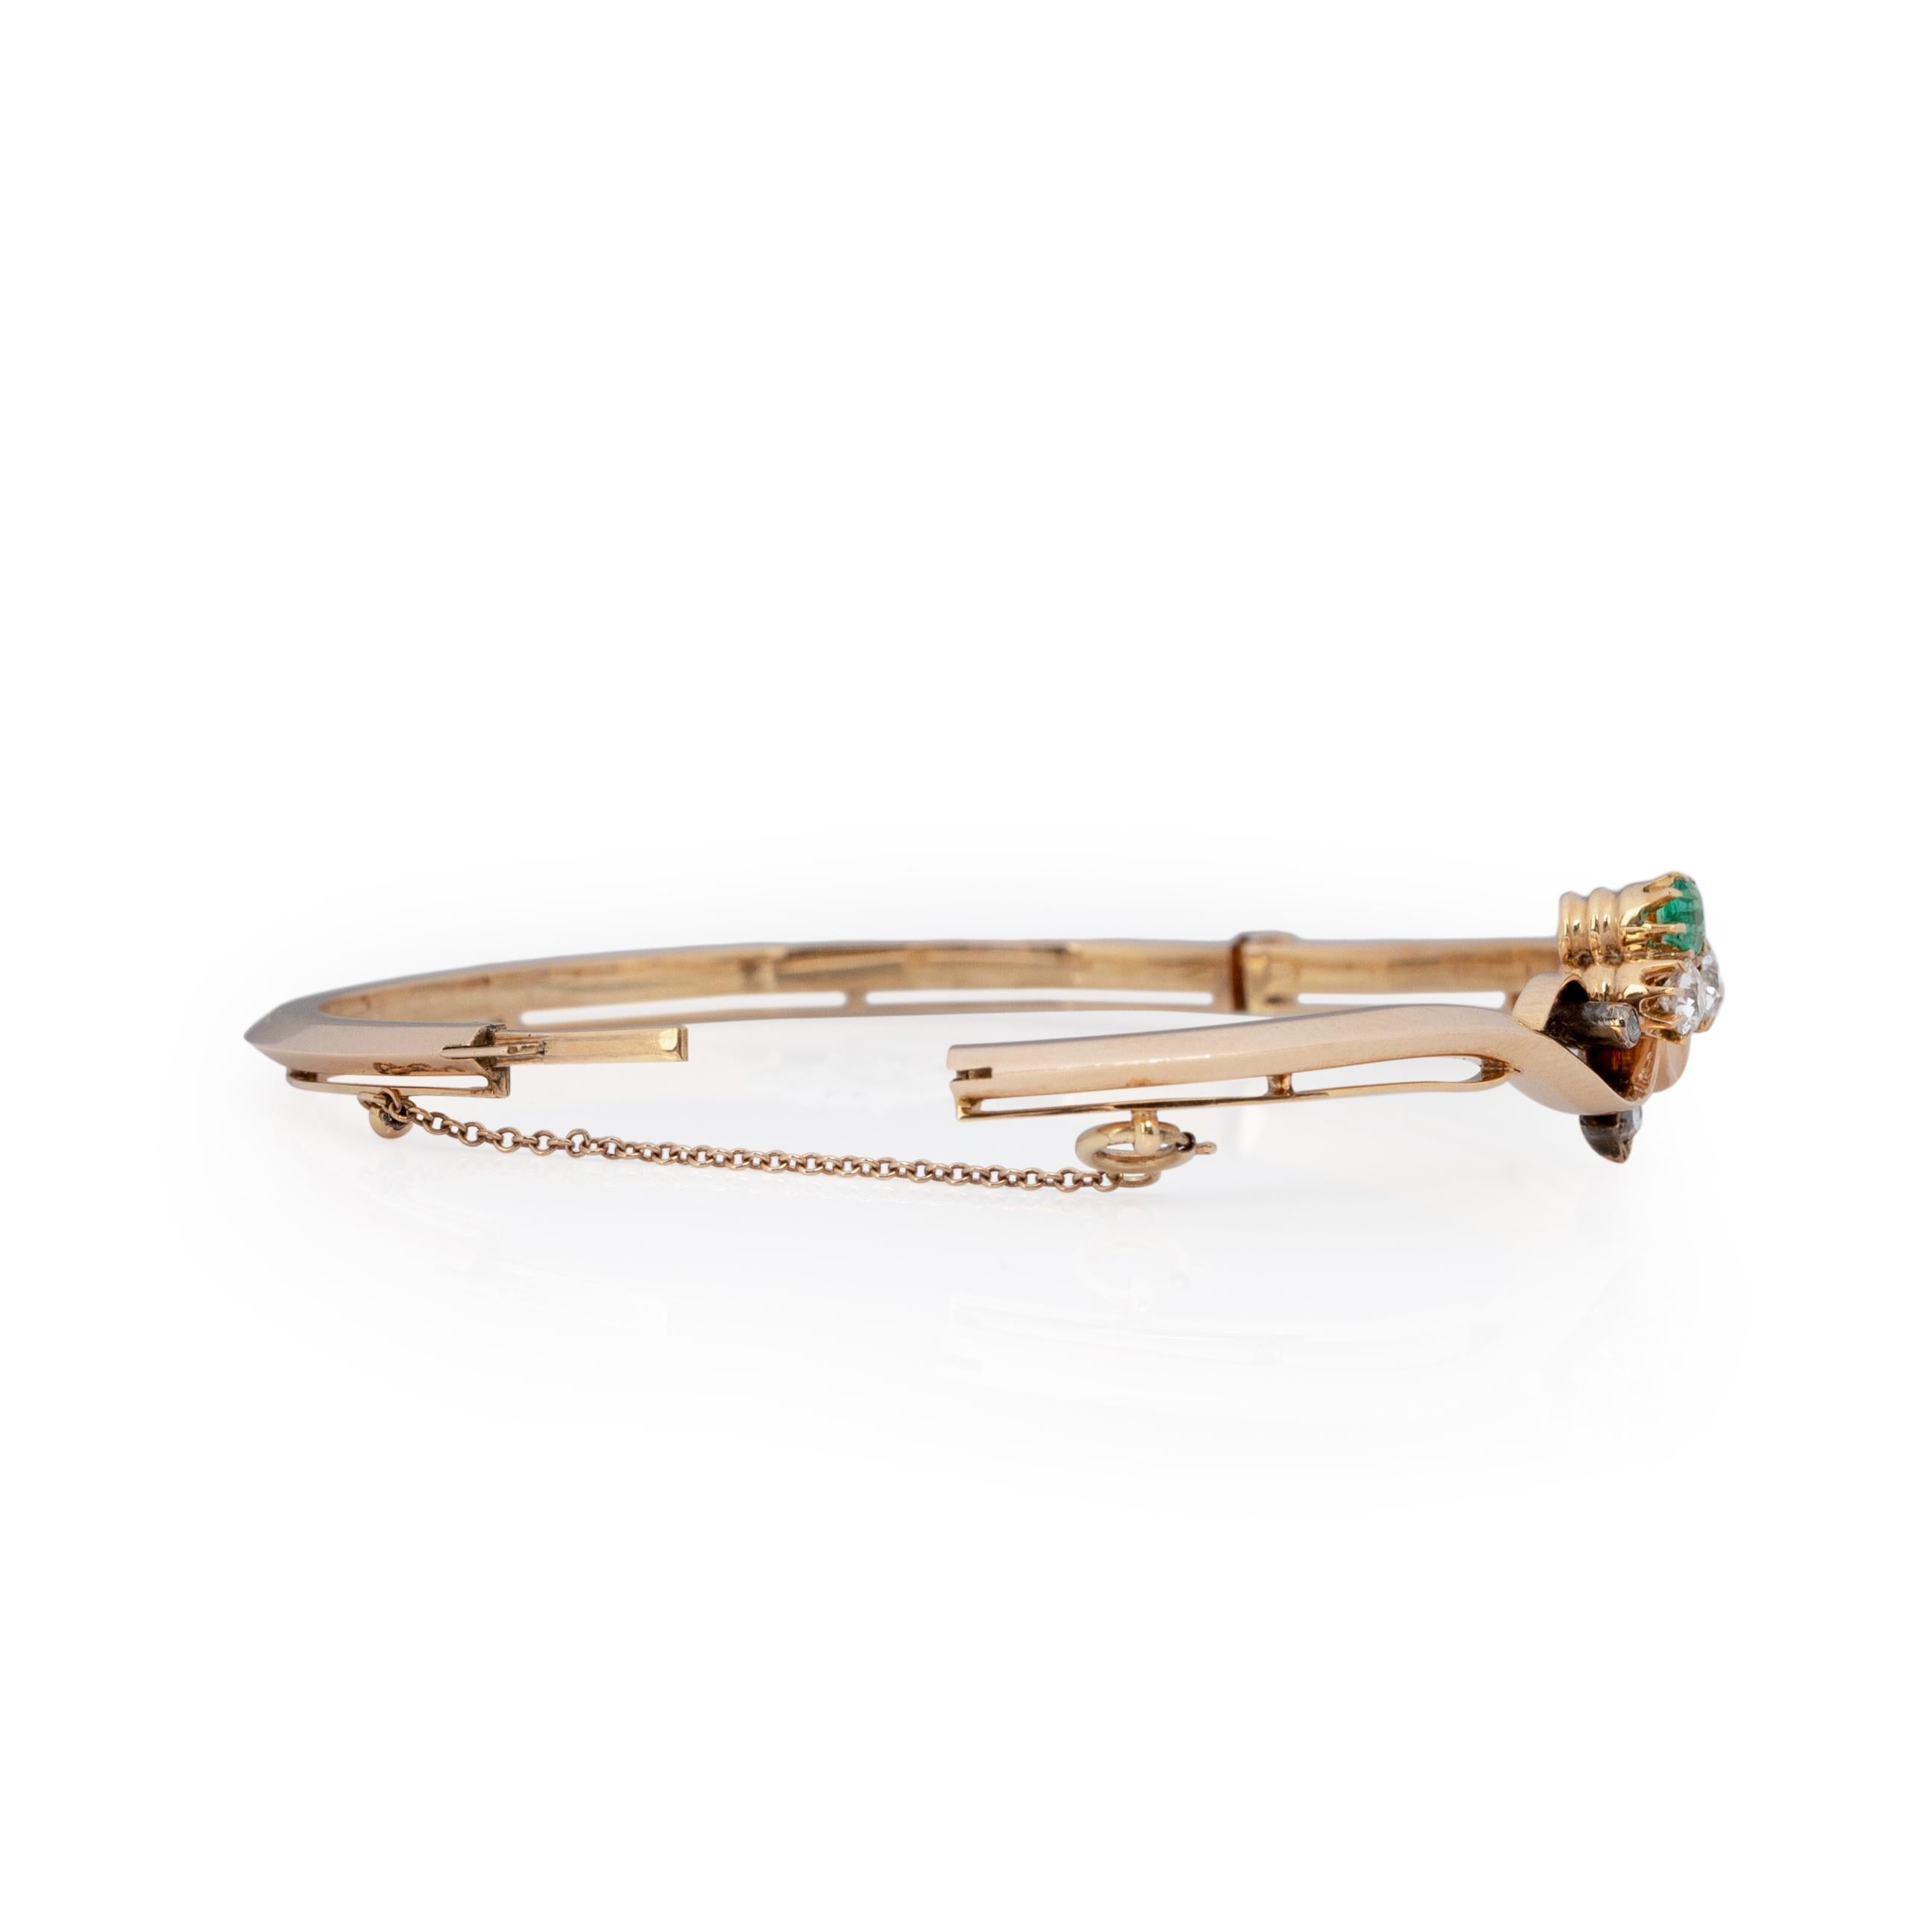 This Victorian treasure is crafted in 14K yellow gold, but depending on the light it can have a beautiful rose hue to it. The classic hinge design has a catch chain along the side to ensure it is not lost. Leading to the center is a clean knife